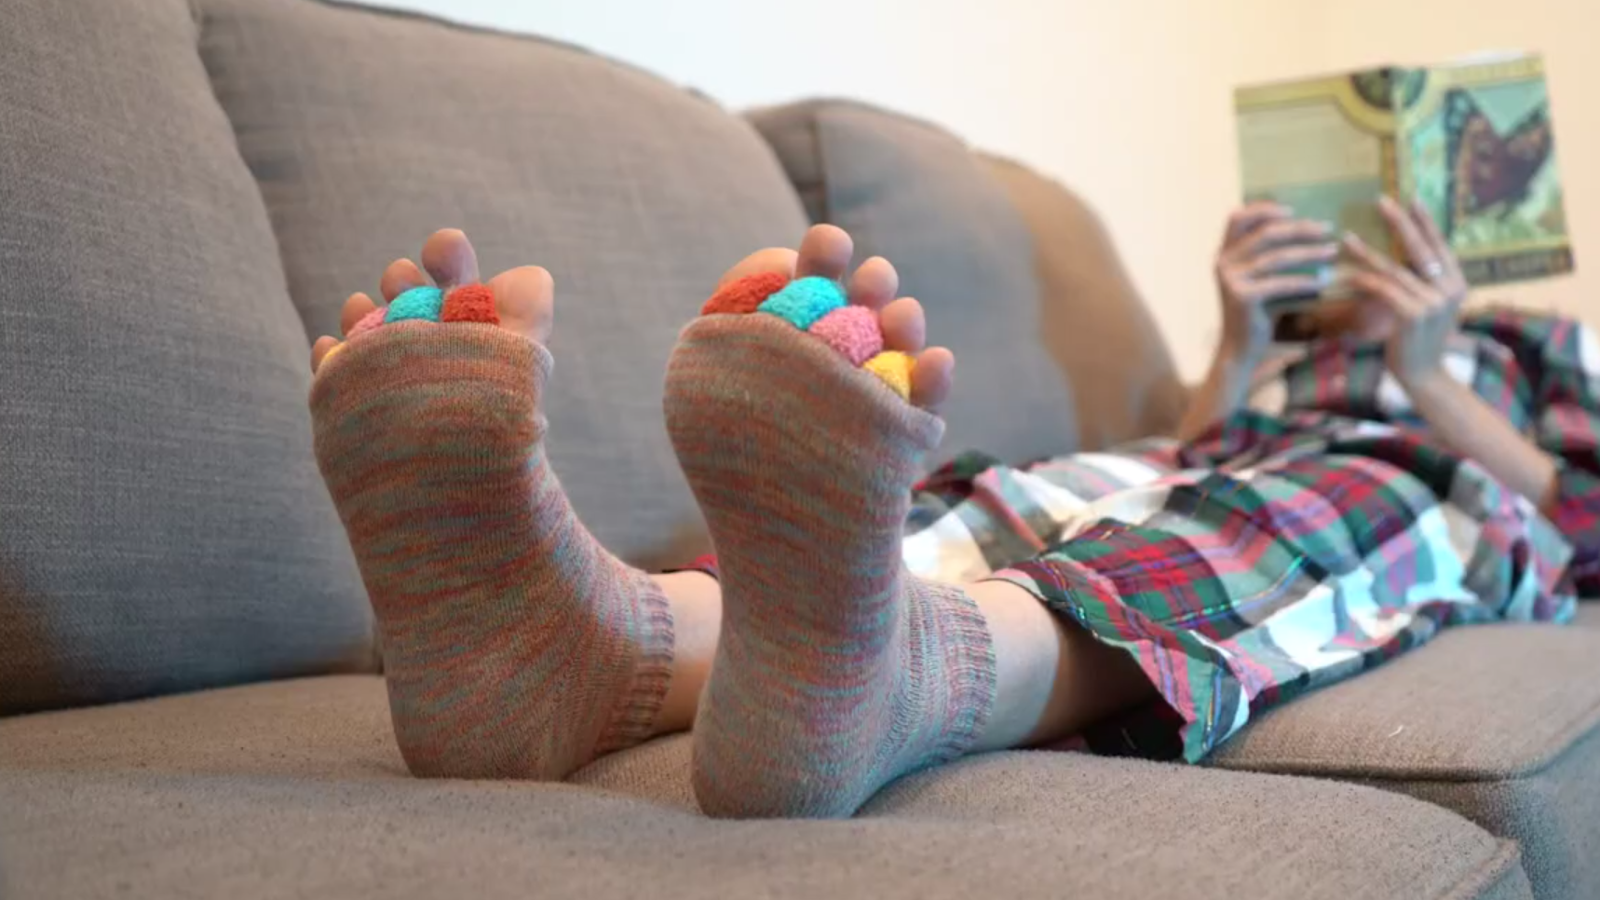 3 easy steps to maximize the benefits of Foot Alignment Socks